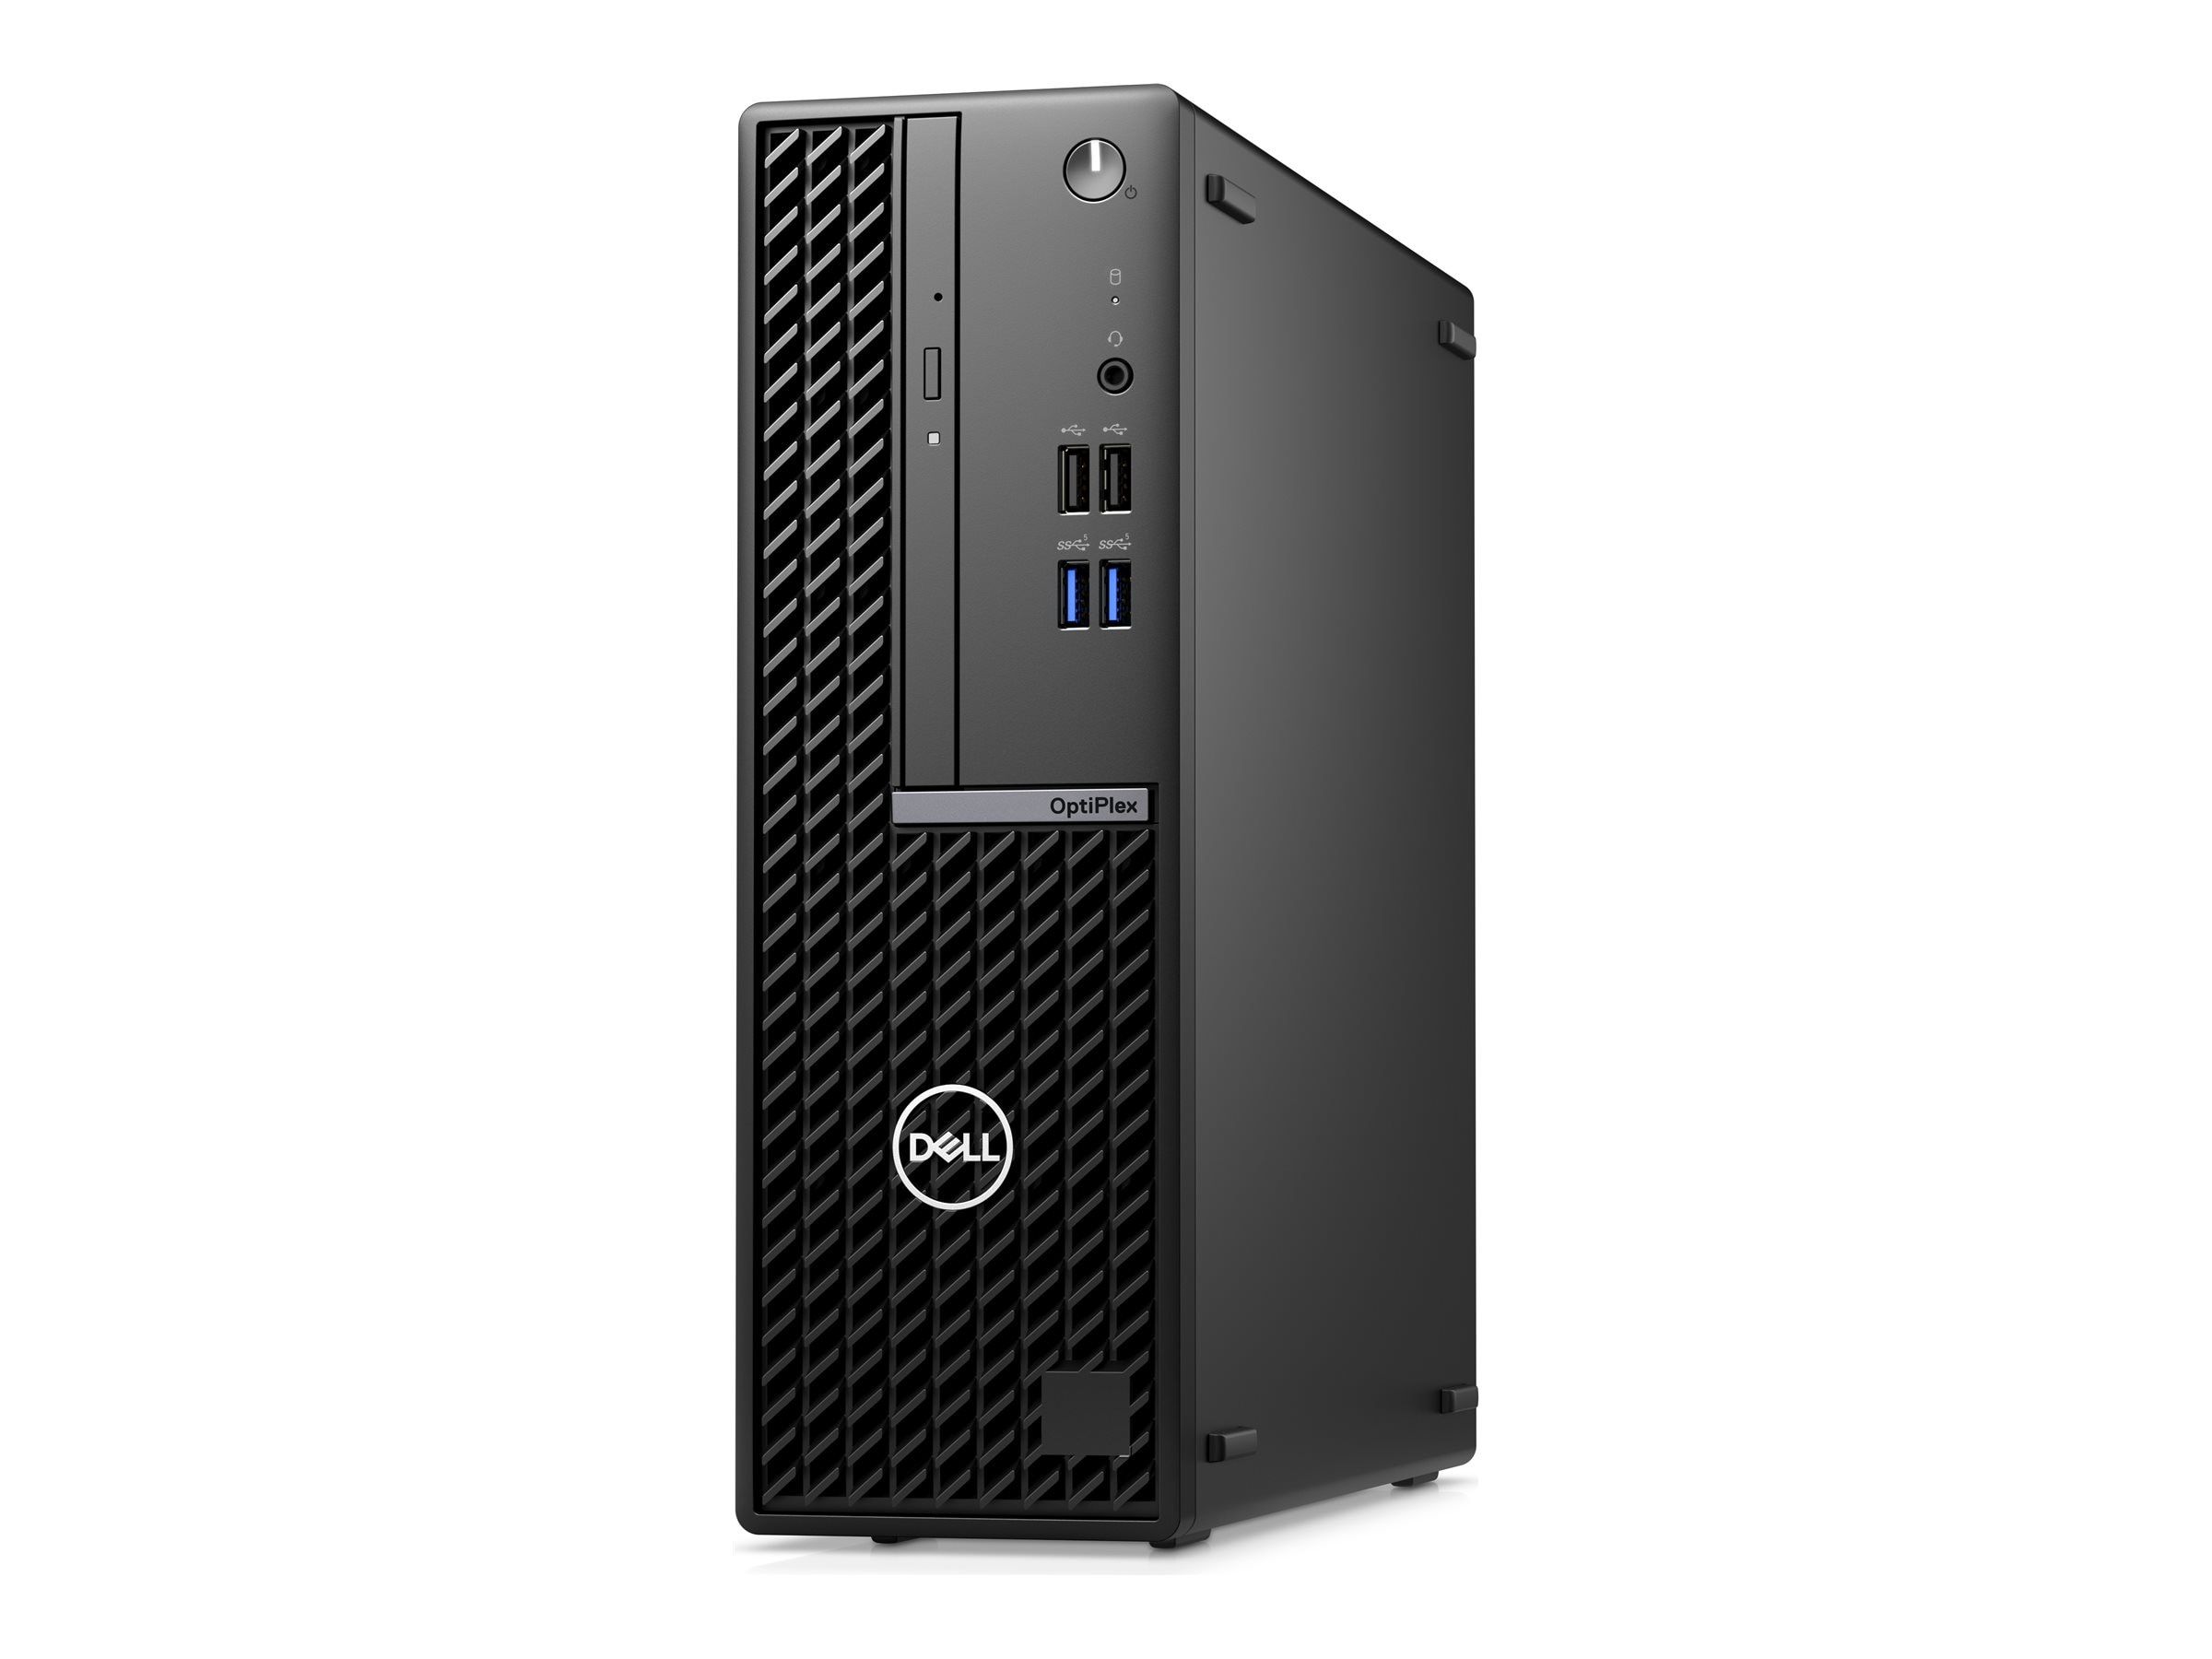 Desktop Dell OptiPlex 7010 Plus SFF, 260W Bronze Power Supply, EPEAT 2018 Registered (Silver), ENERGY STAR Qualified, Trusted Platform Module (Discrete TPM Enabled), Intel Rapid Storage Technology, 13th Gen Intel Core i7-13700 (8+8 Cores/30MB/24T/2.1GHz to 5.1GHz/65W), Intel Integrated Graphics_2